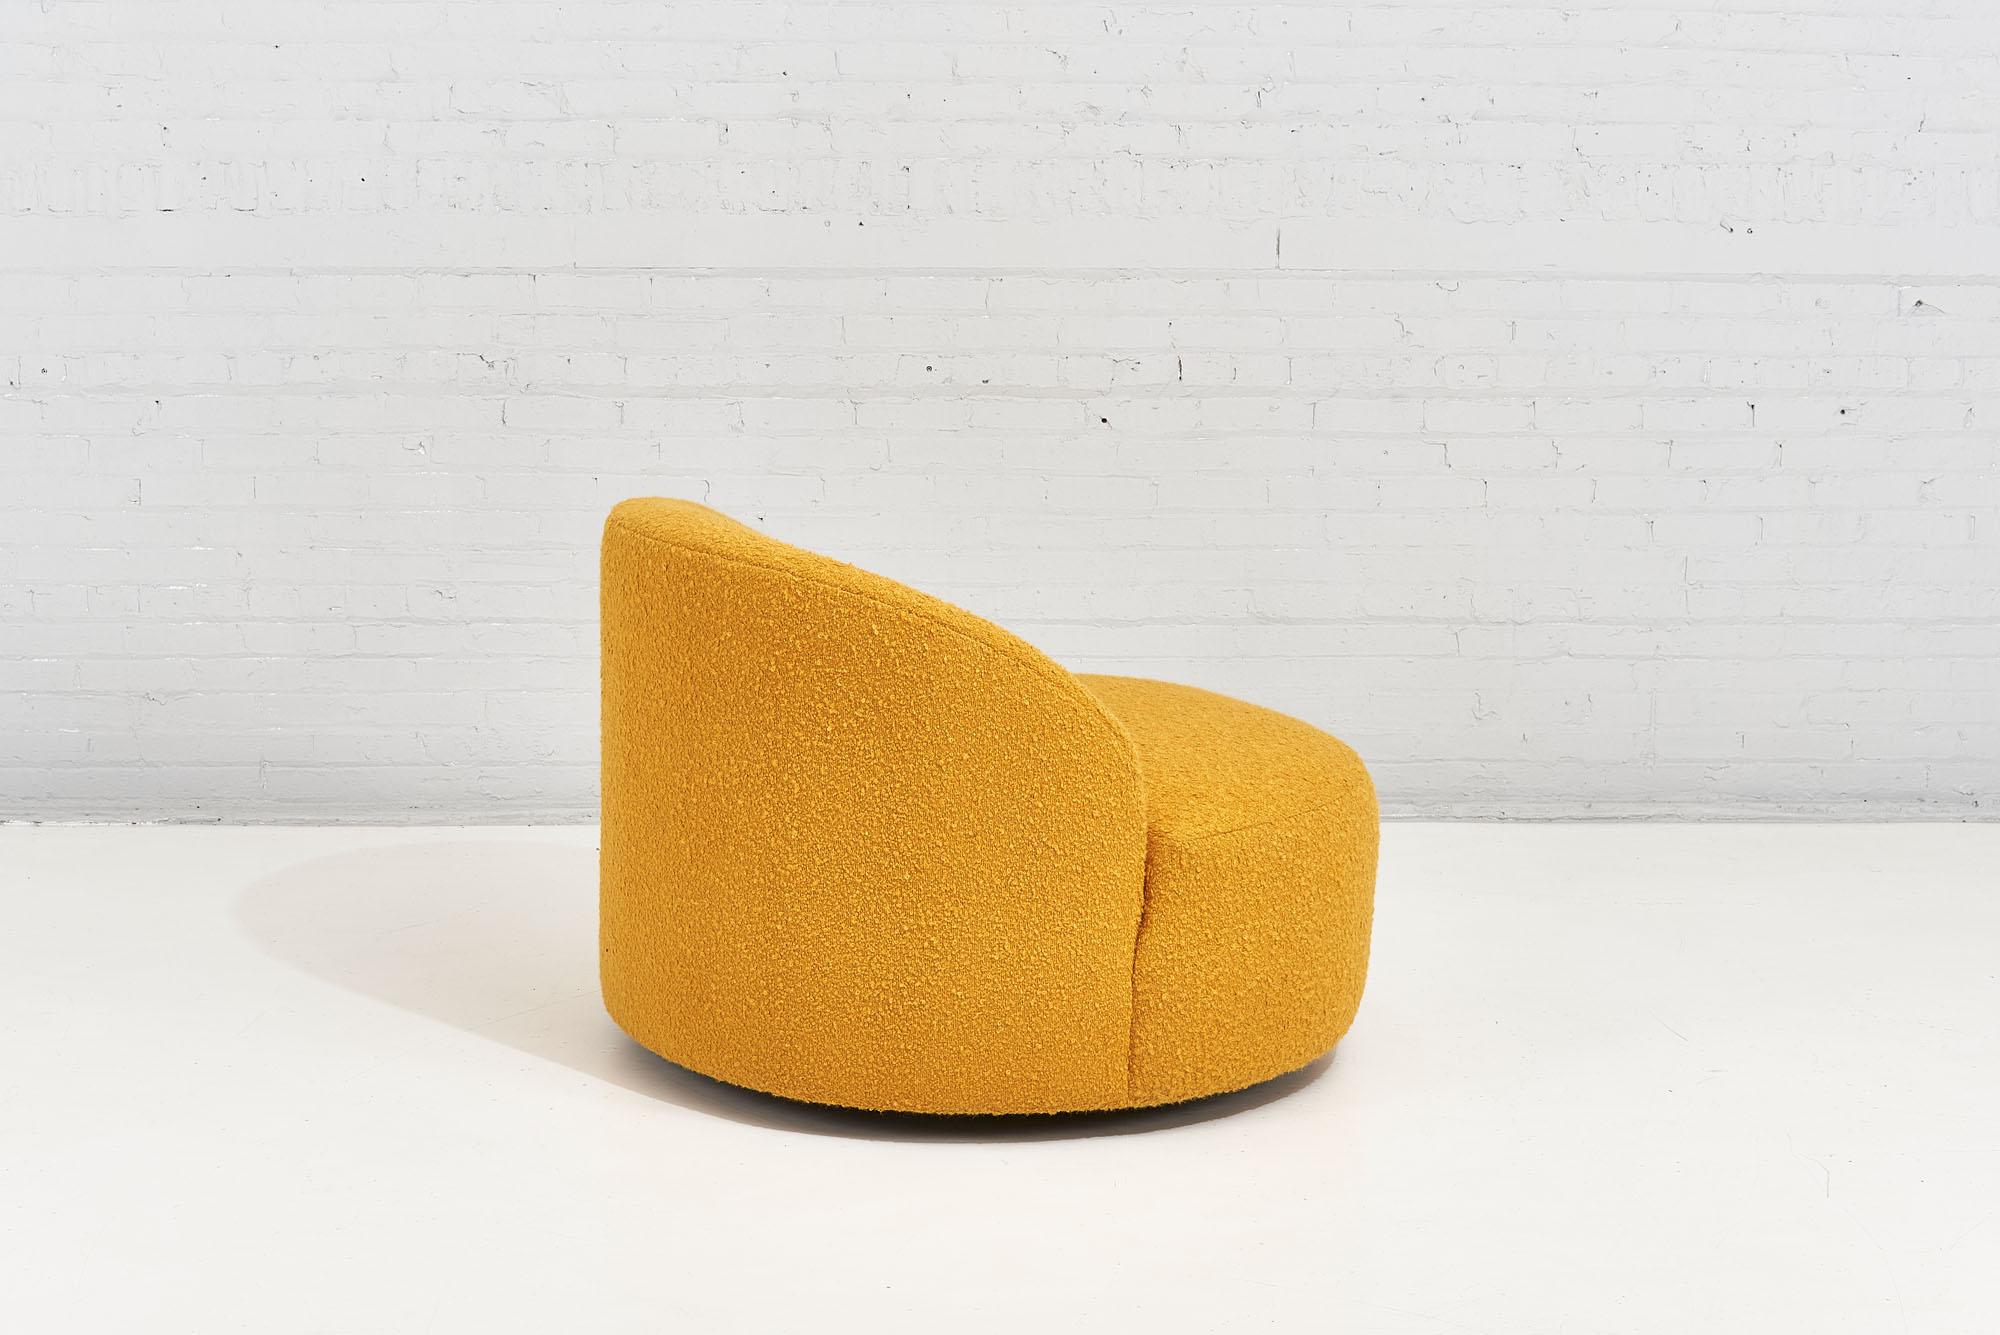 Bouclé Vladimir Kagan Swivel Chaise in Goldenrod Boucle, Preview, 1990